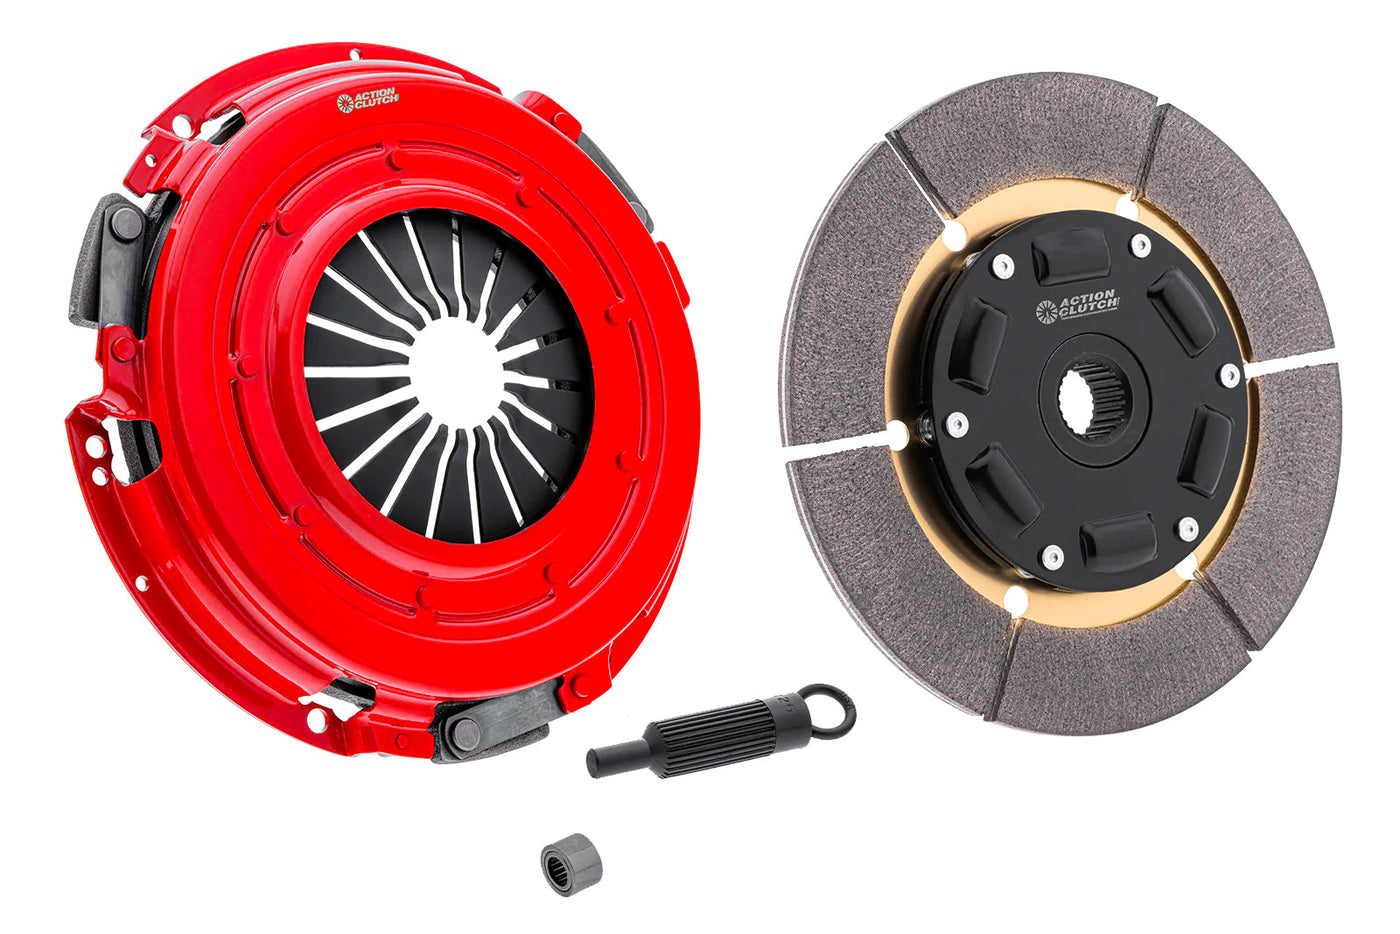 Ironman Sprung (Street) Clutch Kit for Chevrolet Corvette Z06 2001-2004 5.7L (LS6) Without Slave and Release Bearing